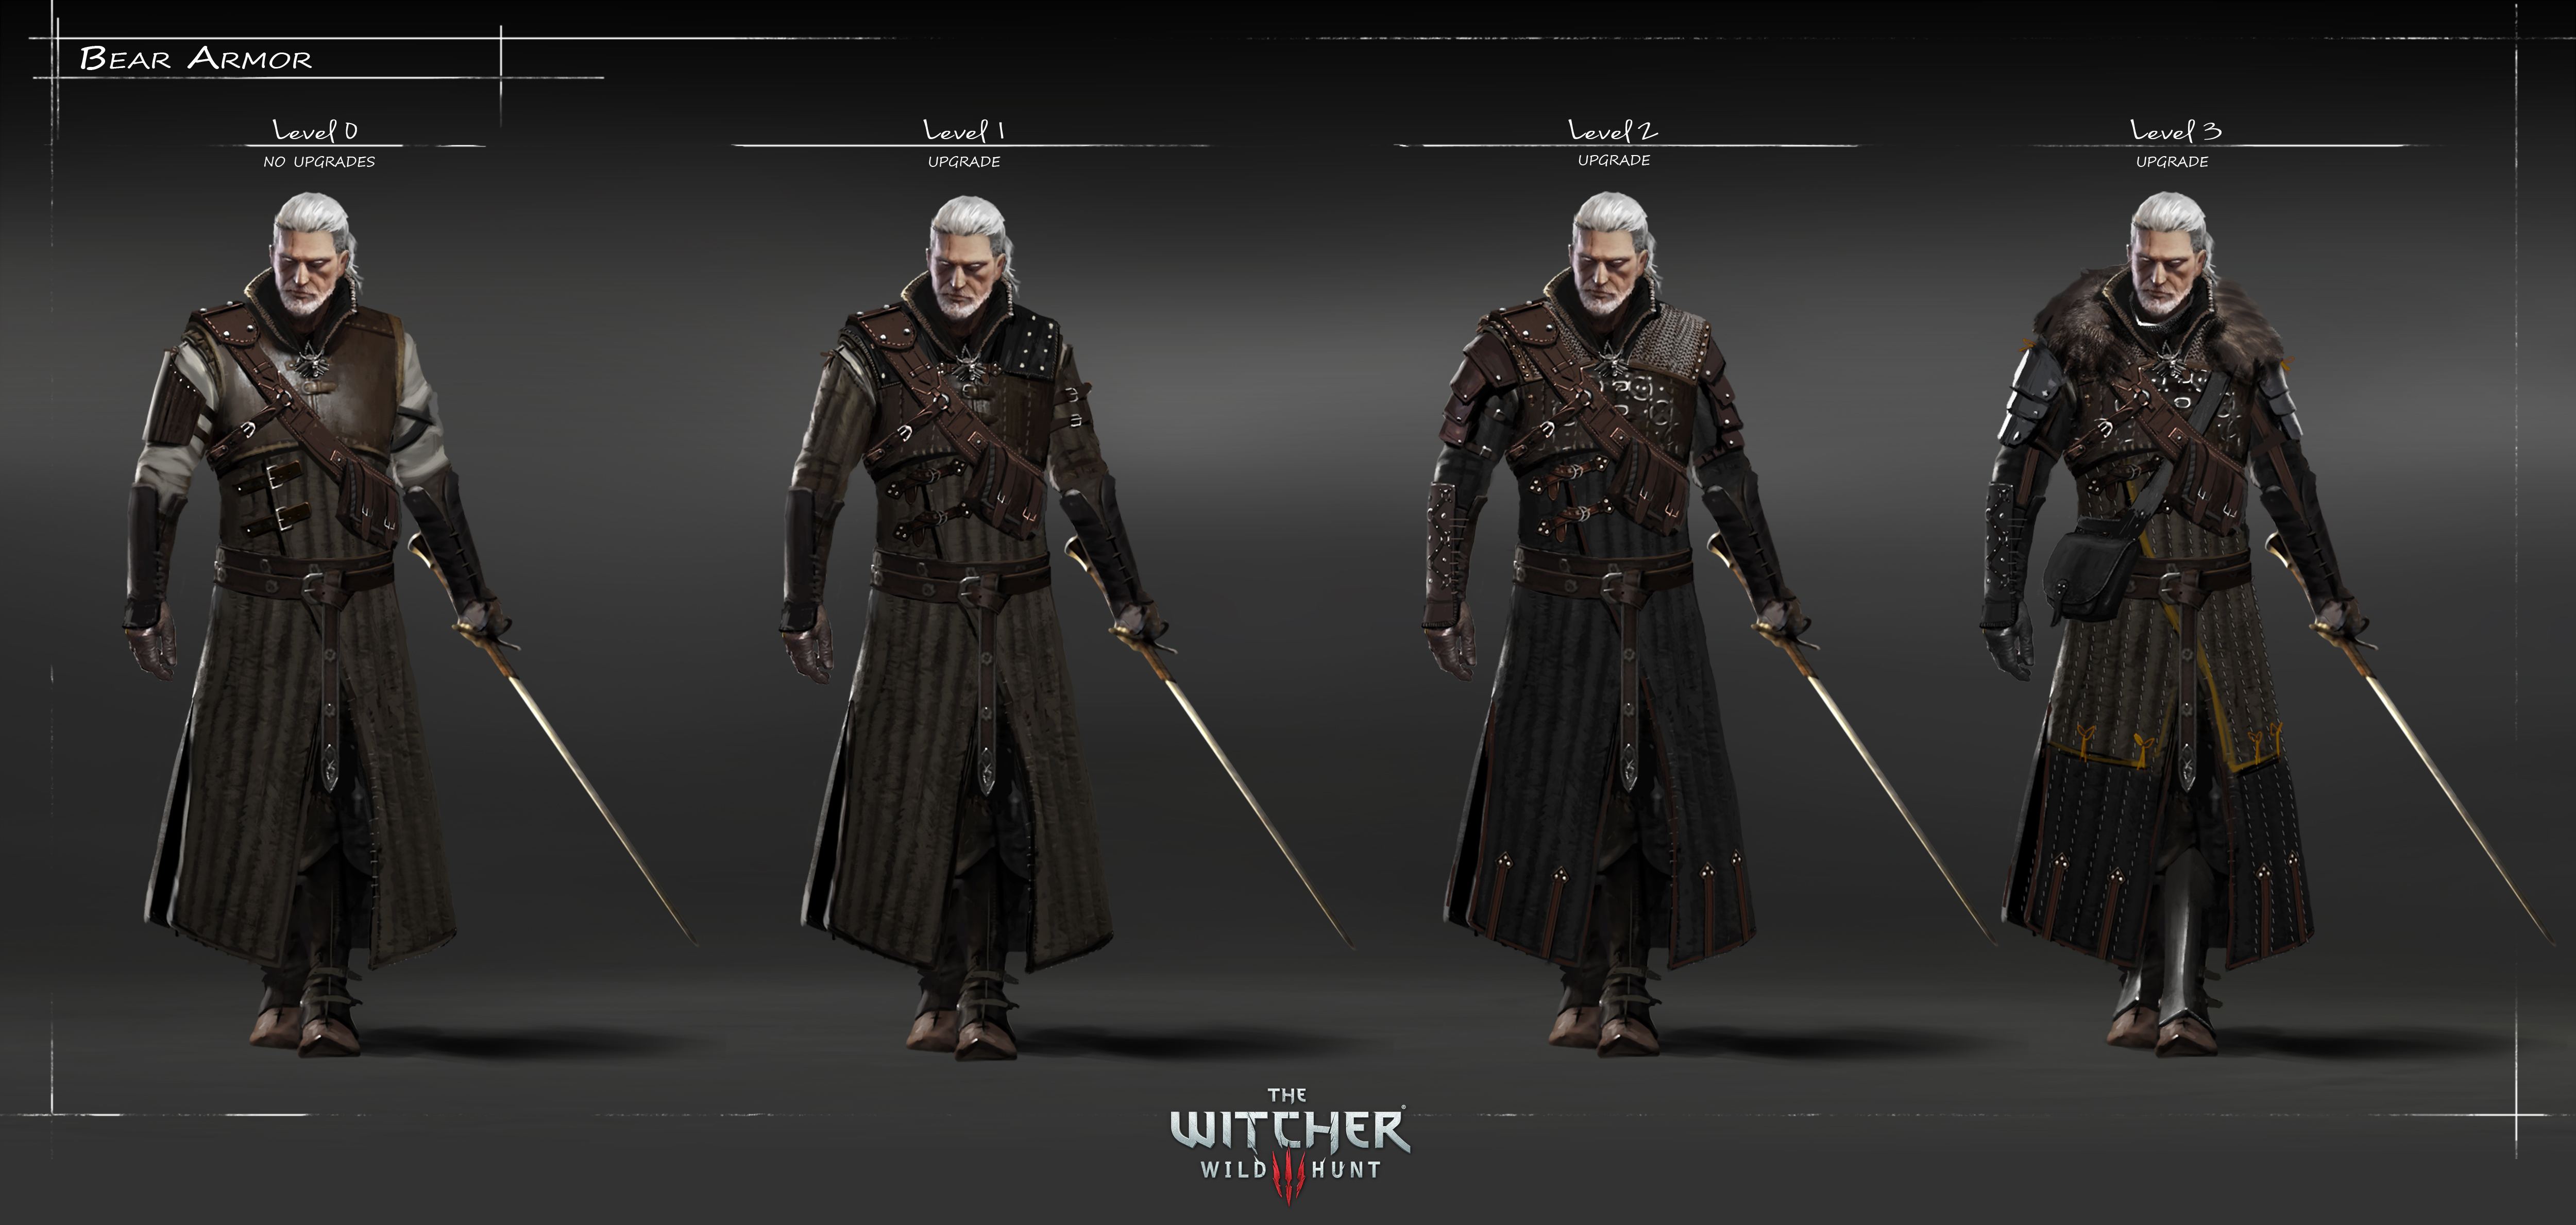 New The Witcher Artwork Some Nice 1080p Screens For Wallpaper